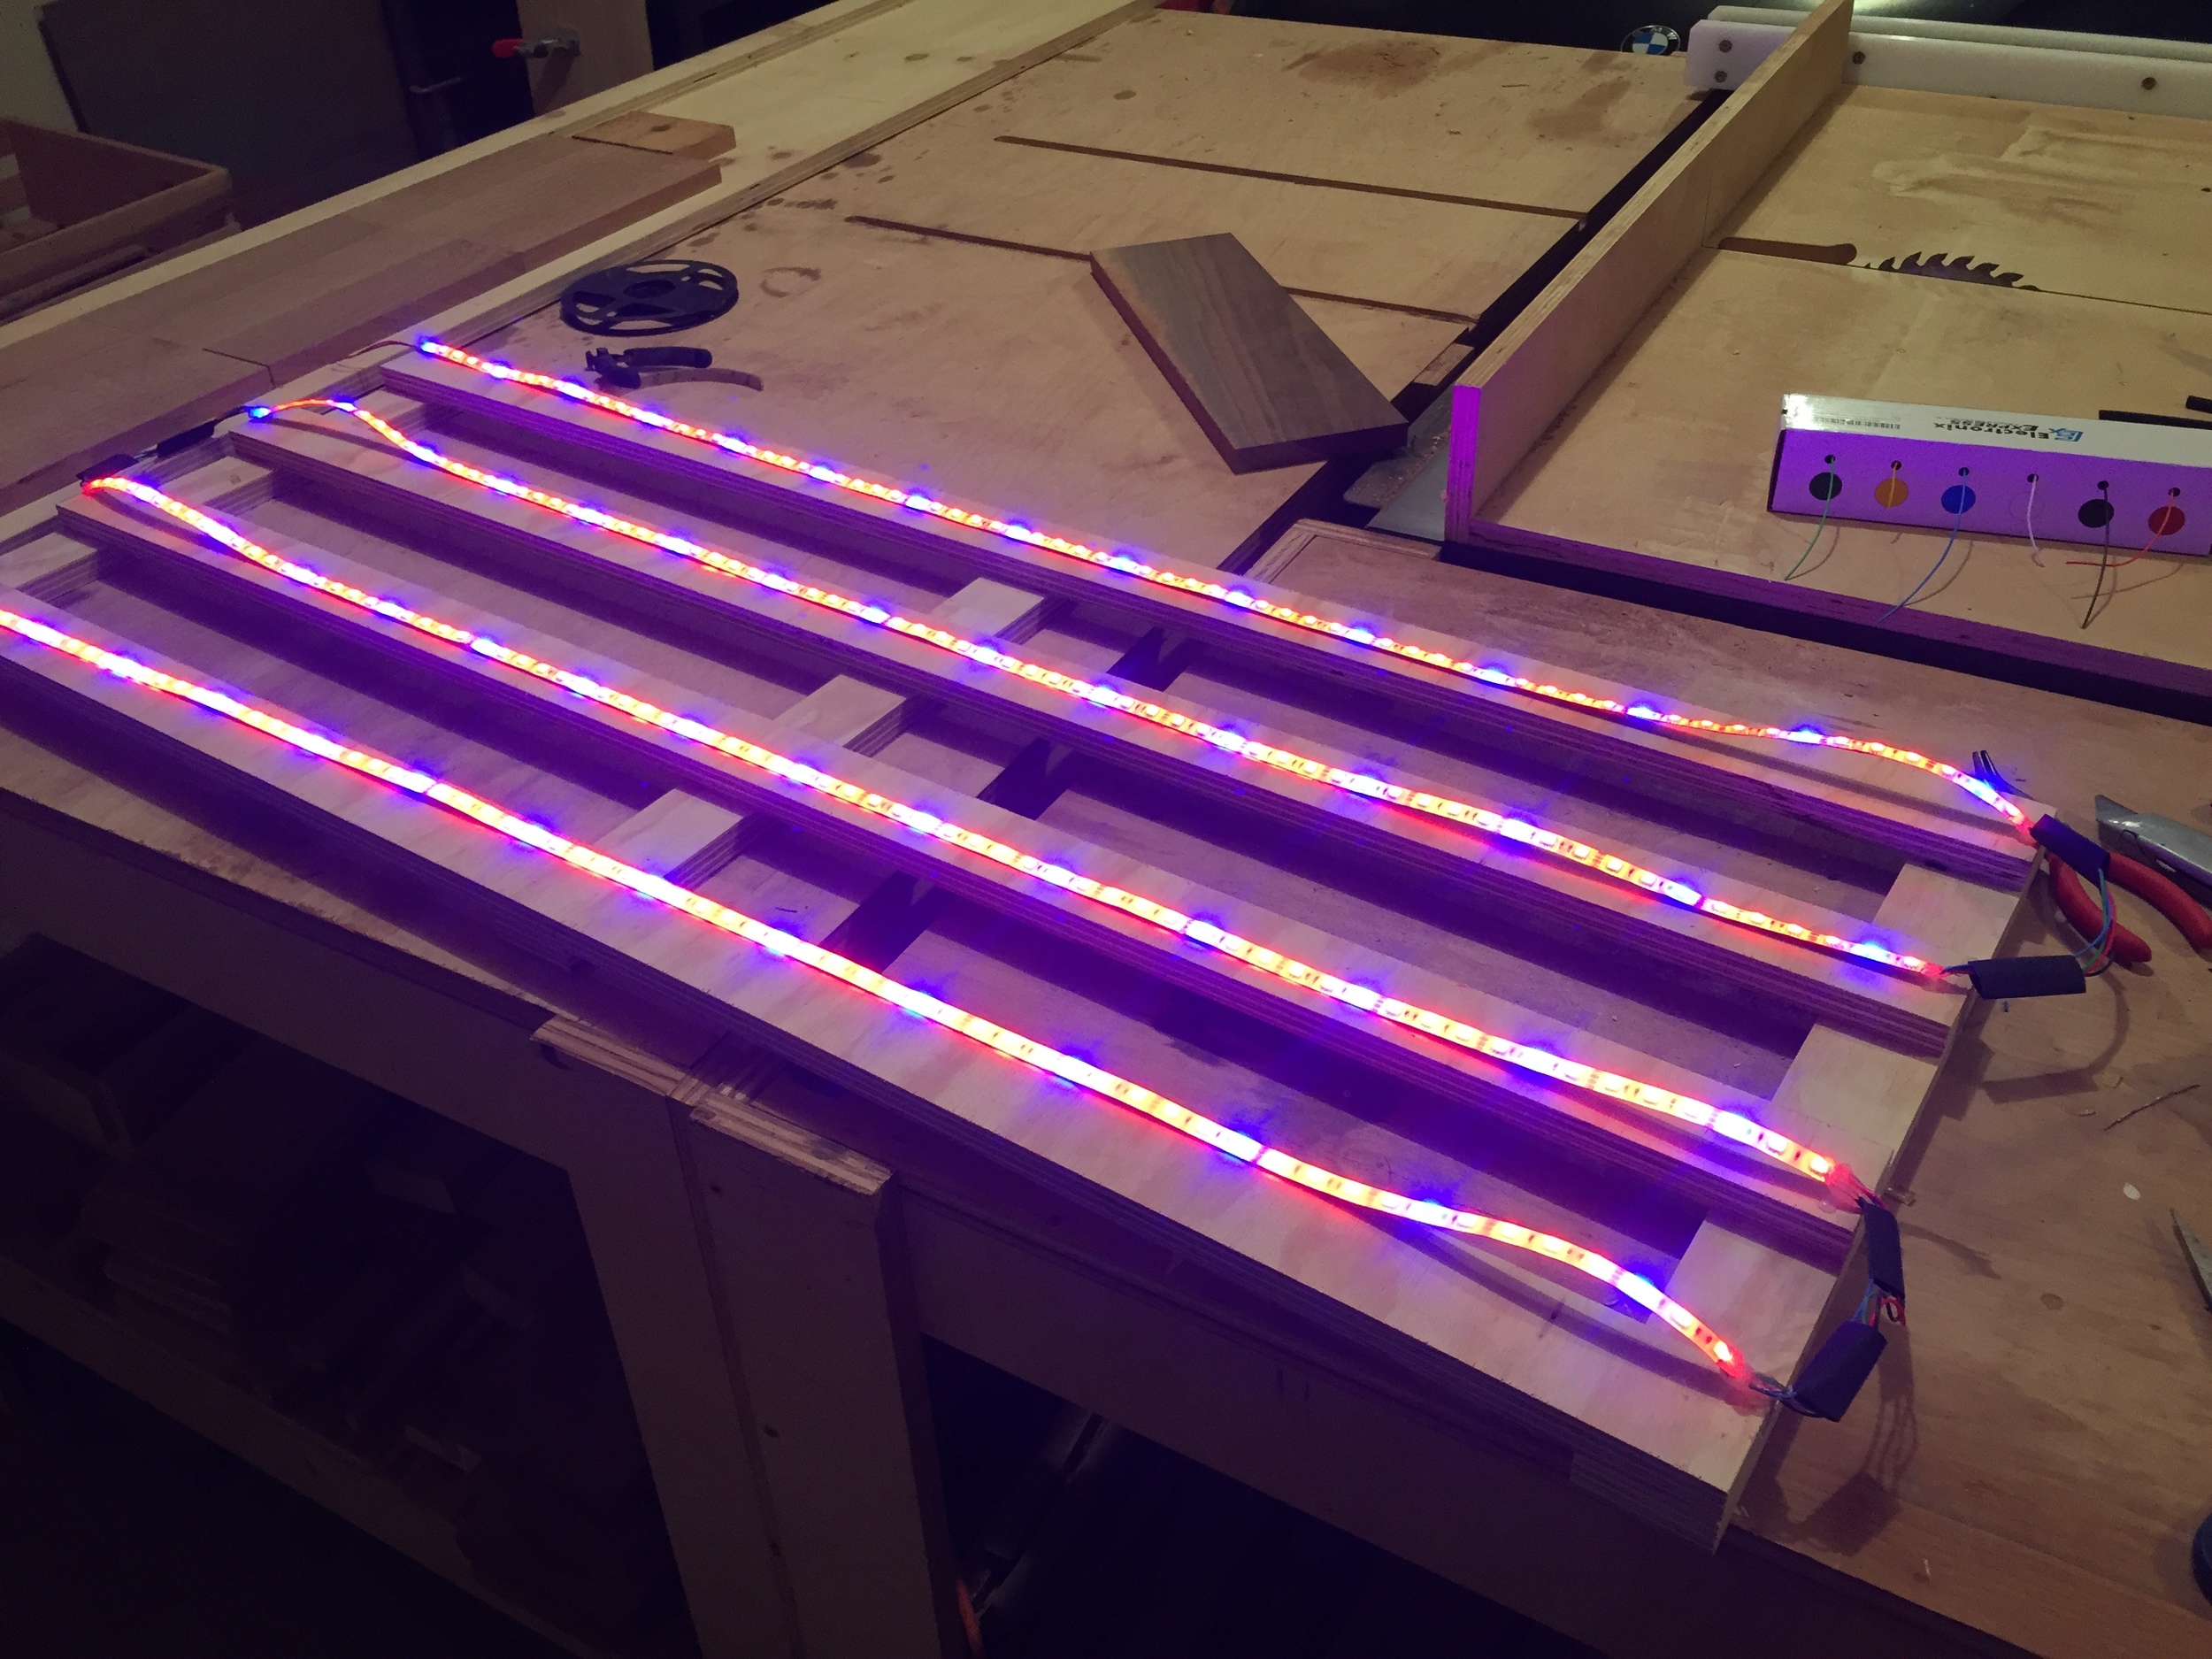  Testing out the LEDs for my seed starting rack. Powered by an old computer power supply! 